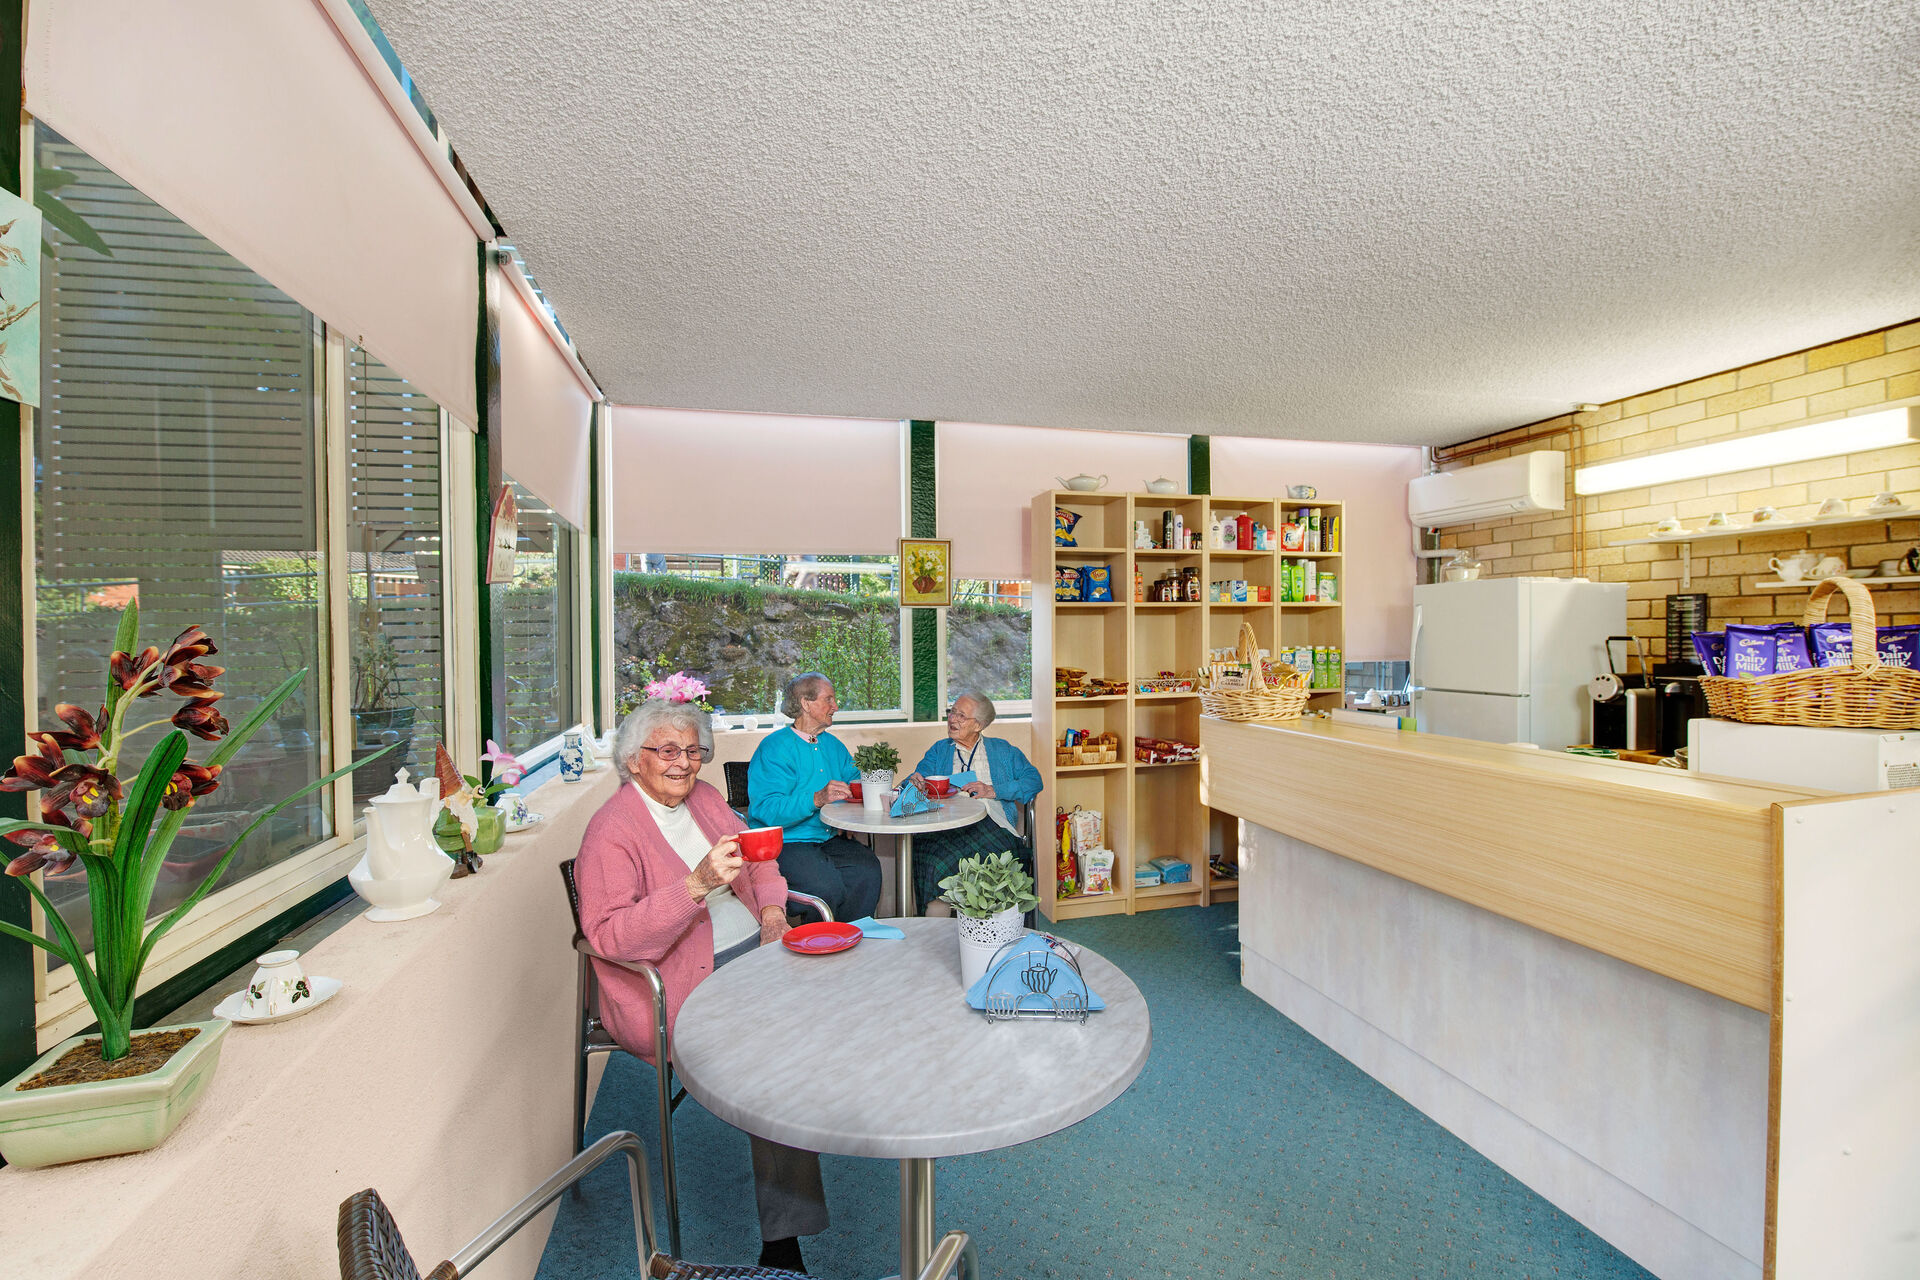 communal sitting space for aged care residents to socialise at baptistcare cooinda court residential aged care home in macquarie park northern sydney